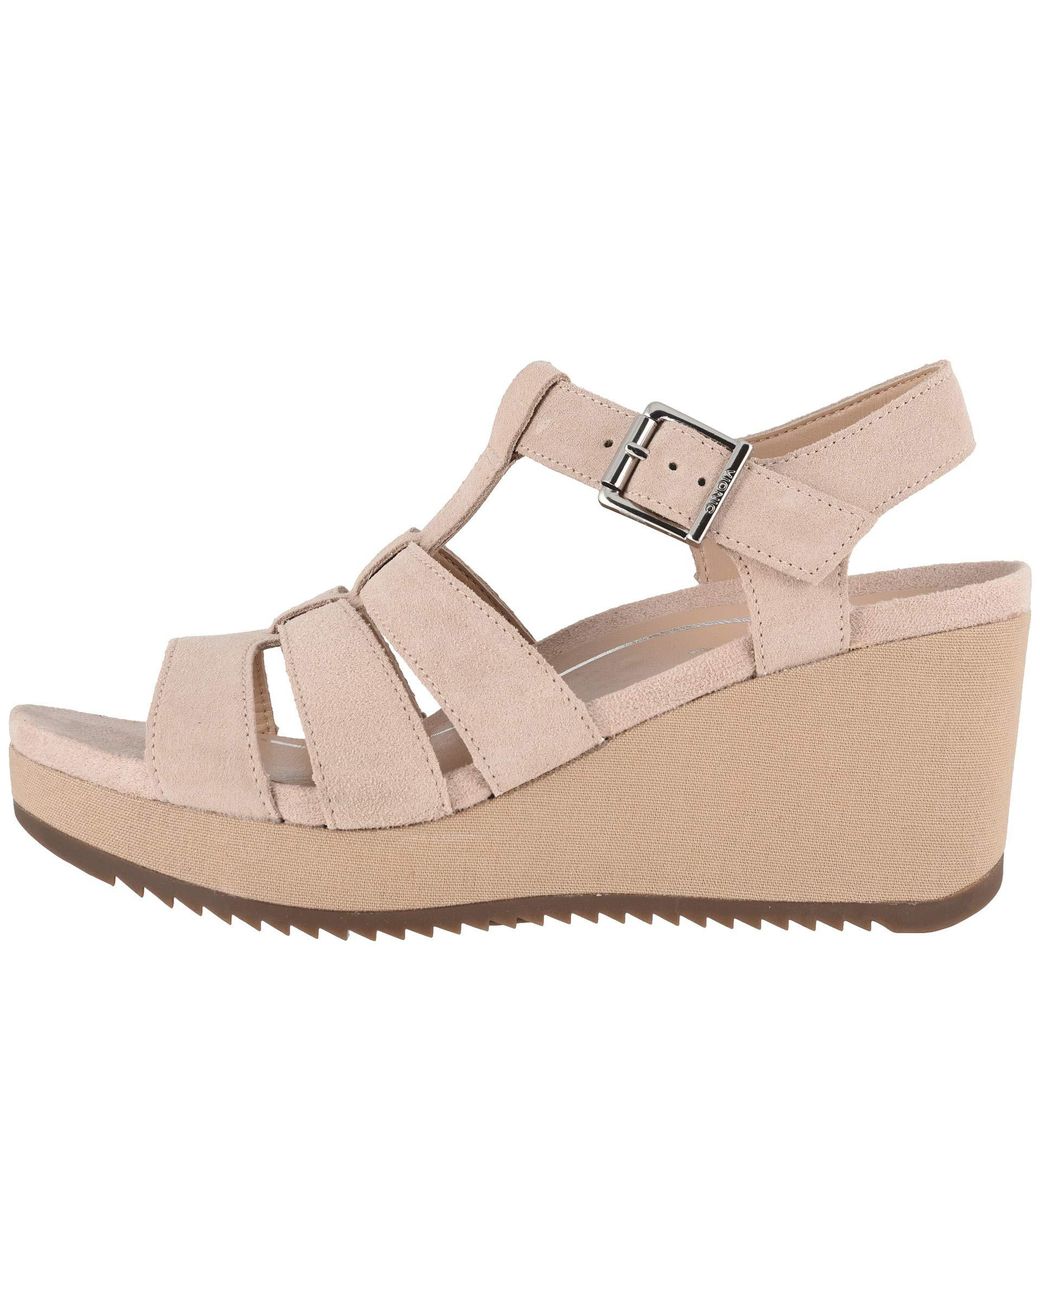 Vionic Tawny Suede Platform Wedge Sandals in Natural | Lyst